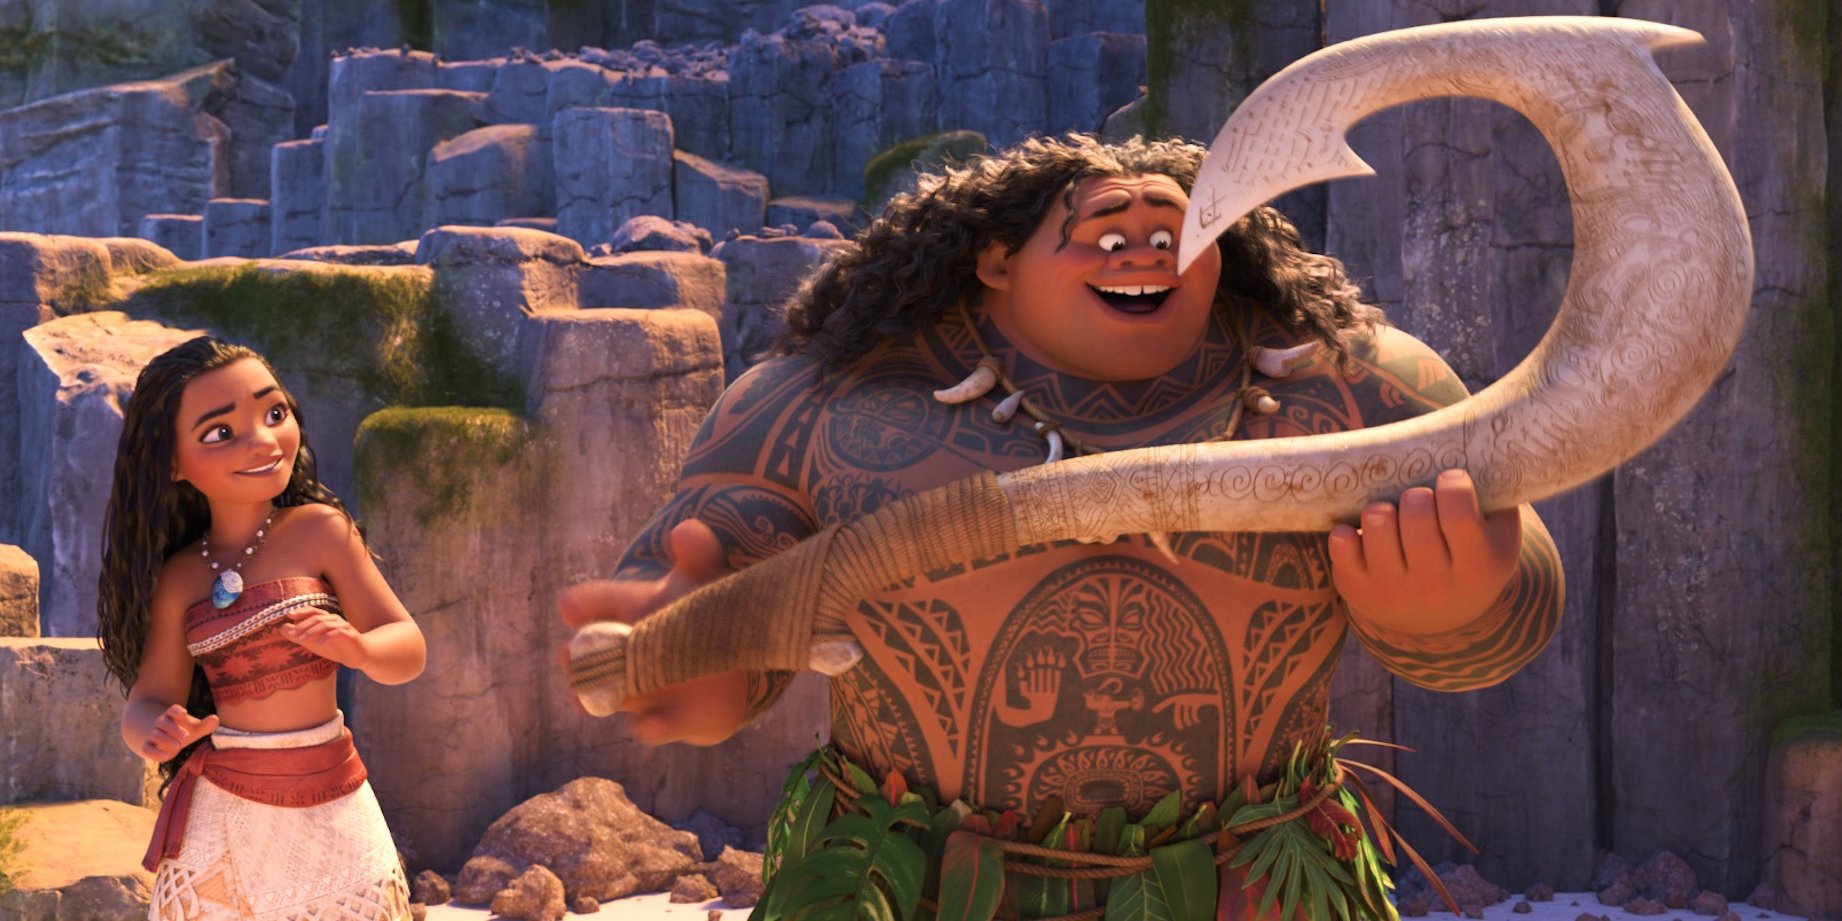 https://clture.org/wp-content/uploads/2016/11/moana-and-maui-with-hook-disney.jpg